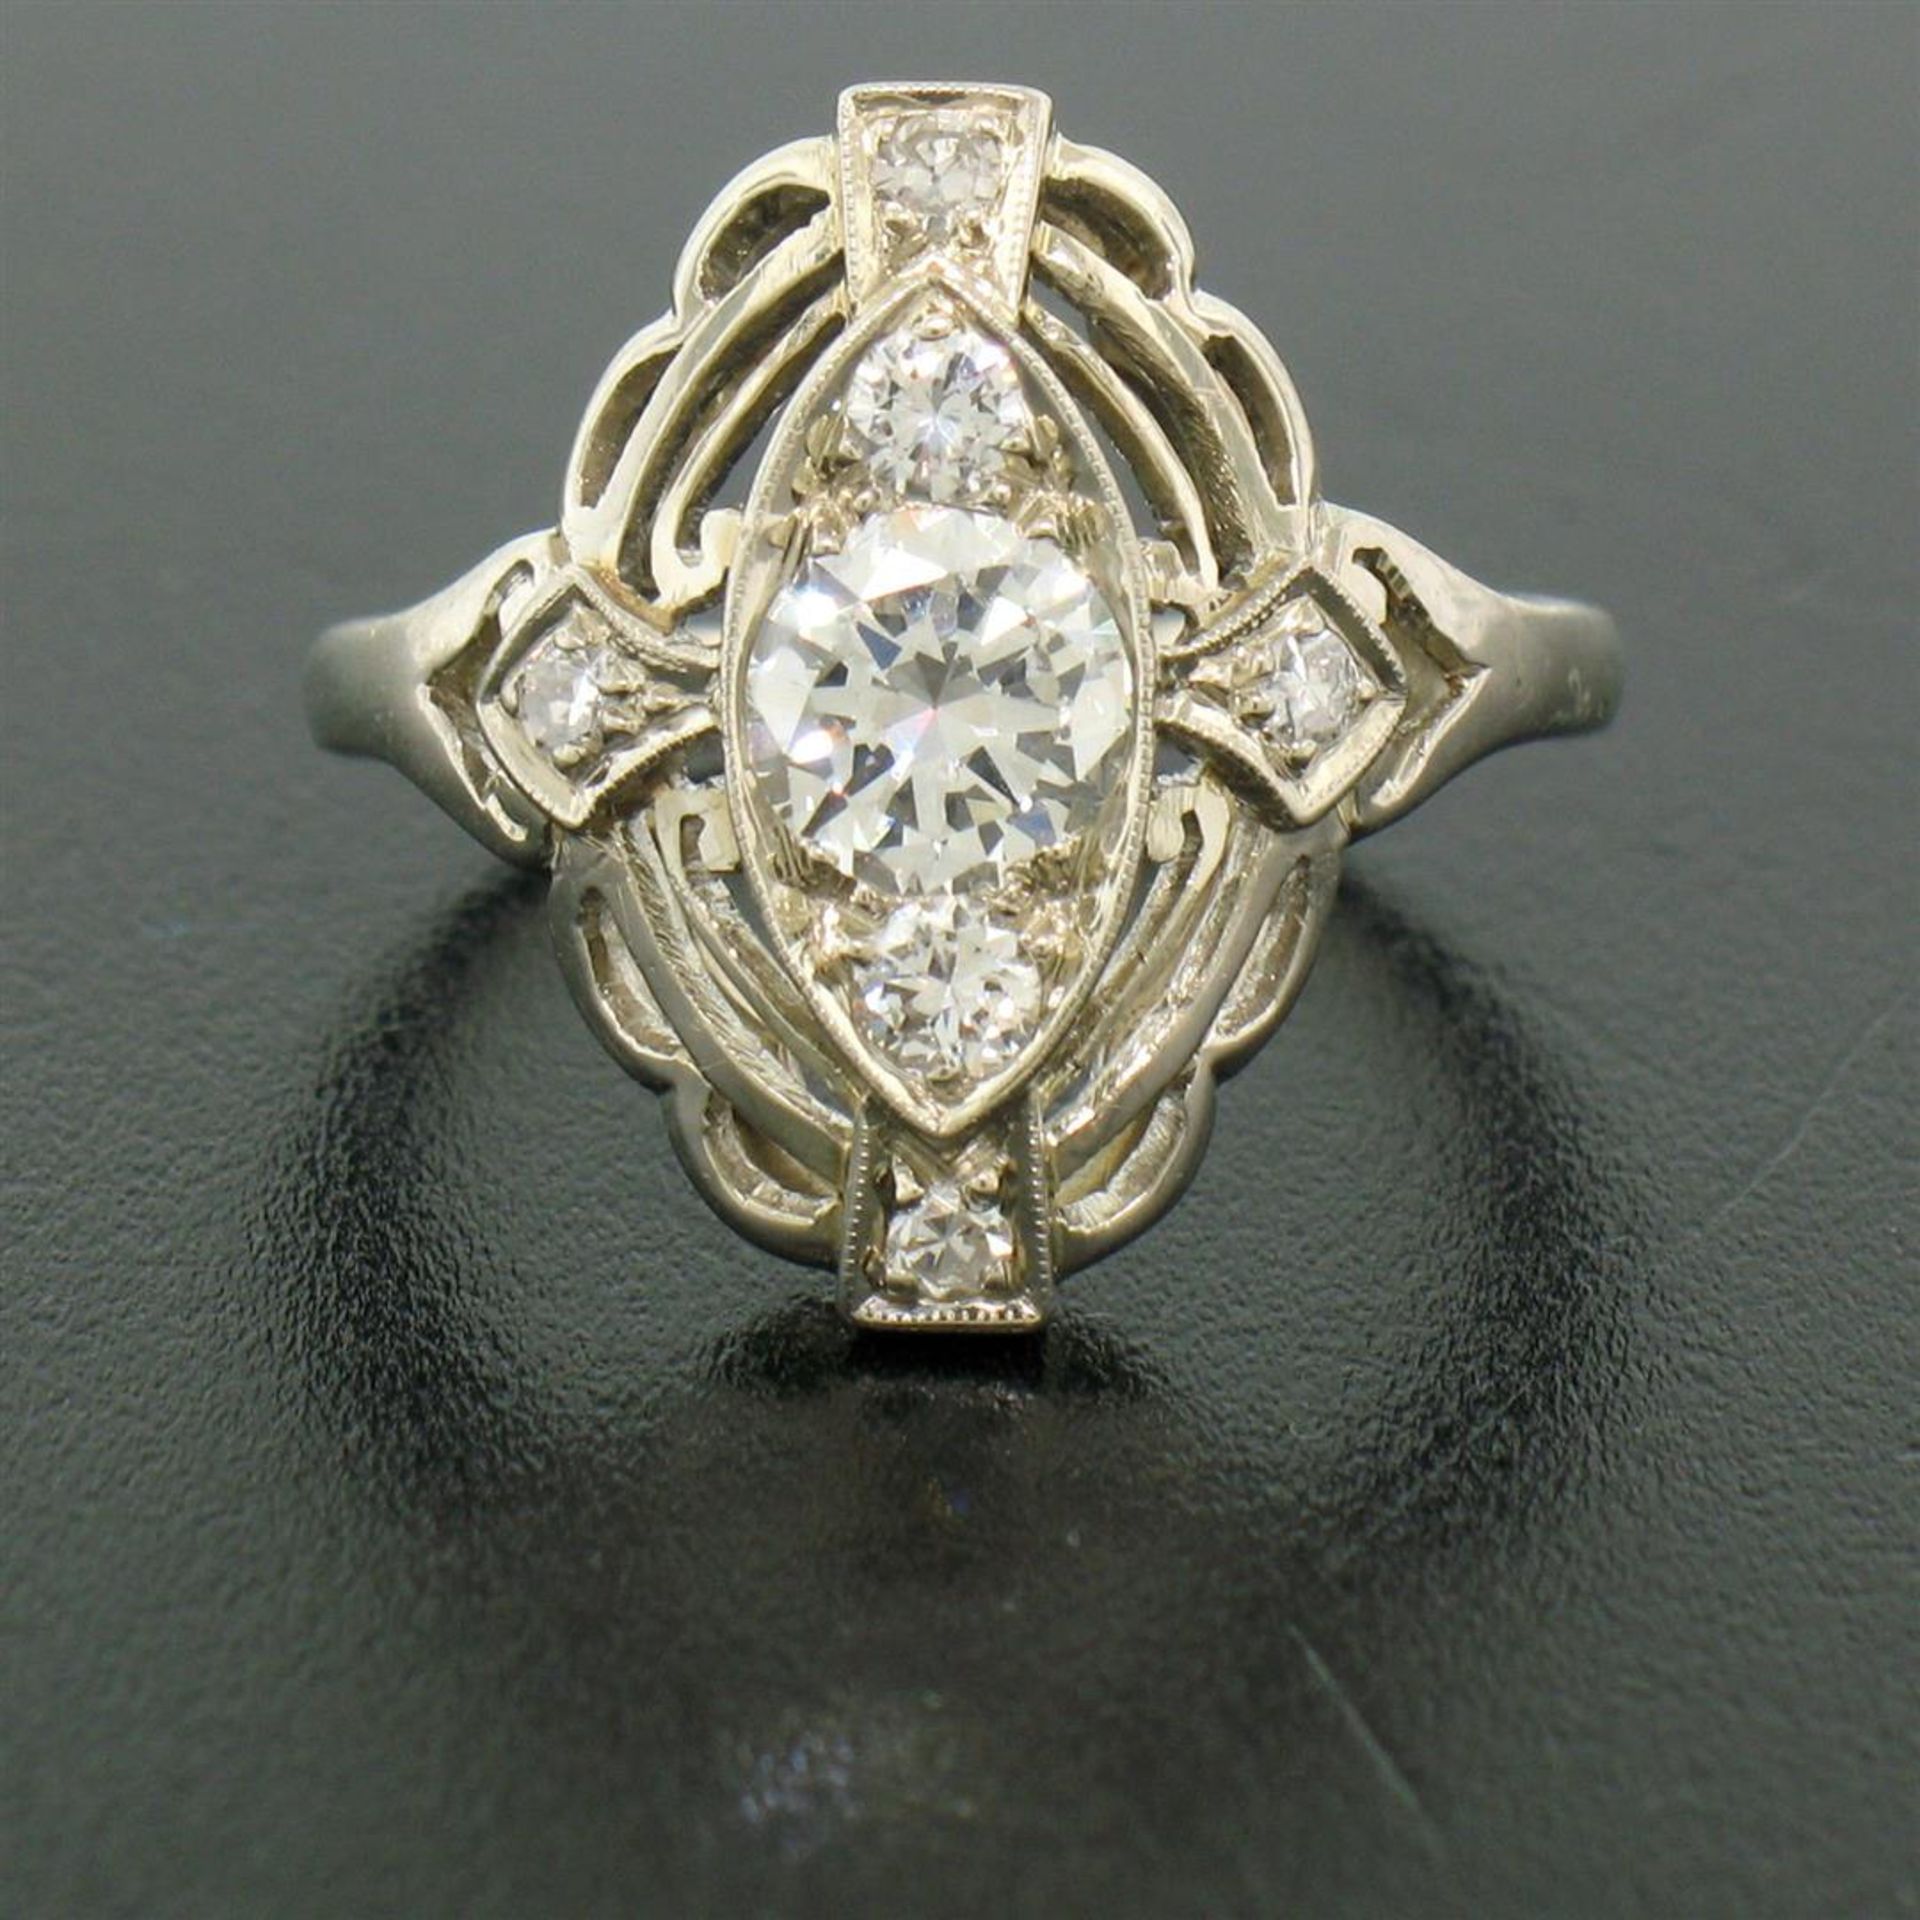 Art Deco 14k White Gold 0.85 ctw Diamond Large Open Work Cocktail Ring - Image 2 of 9